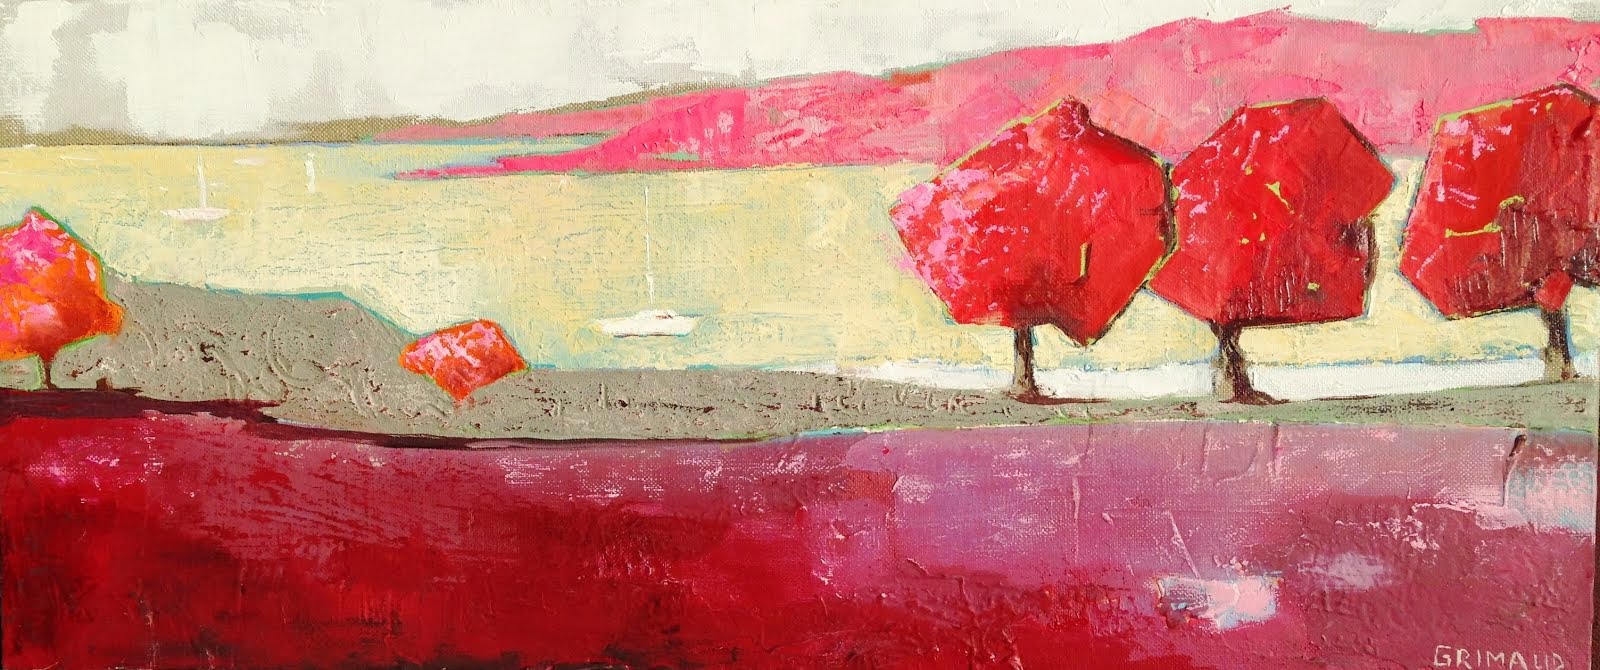 Rive rouge (70x30)